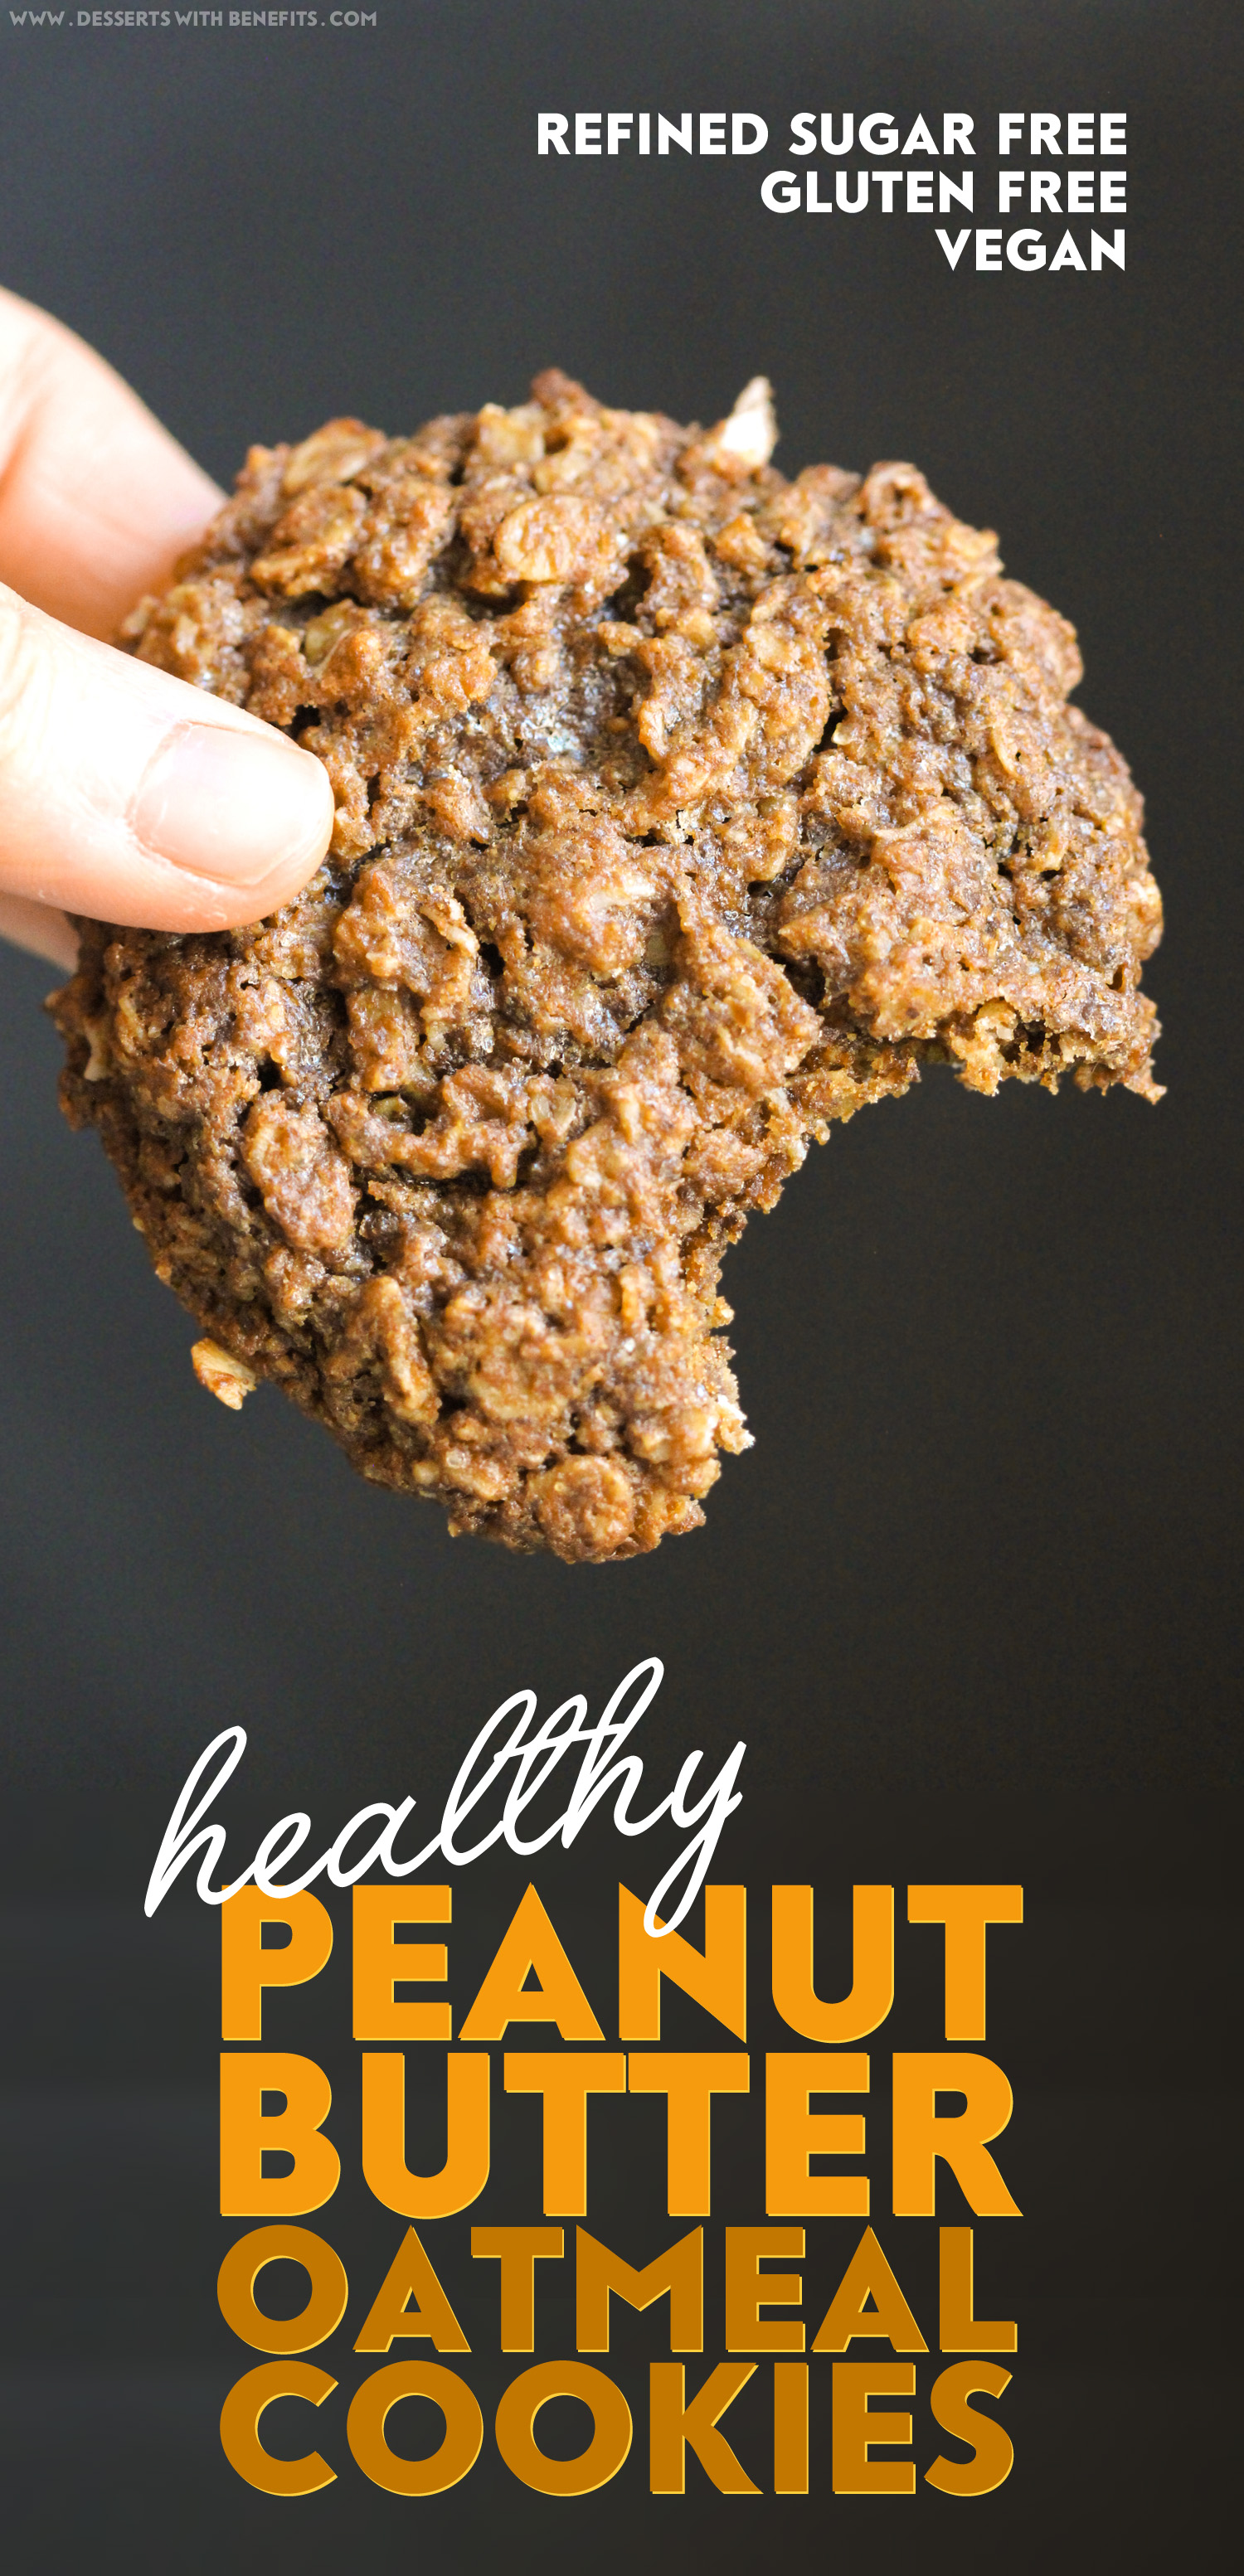 30 healthy 30 minute dessert recipes -- 1/30: Chewy Peanut Butter Oatmeal Cookies